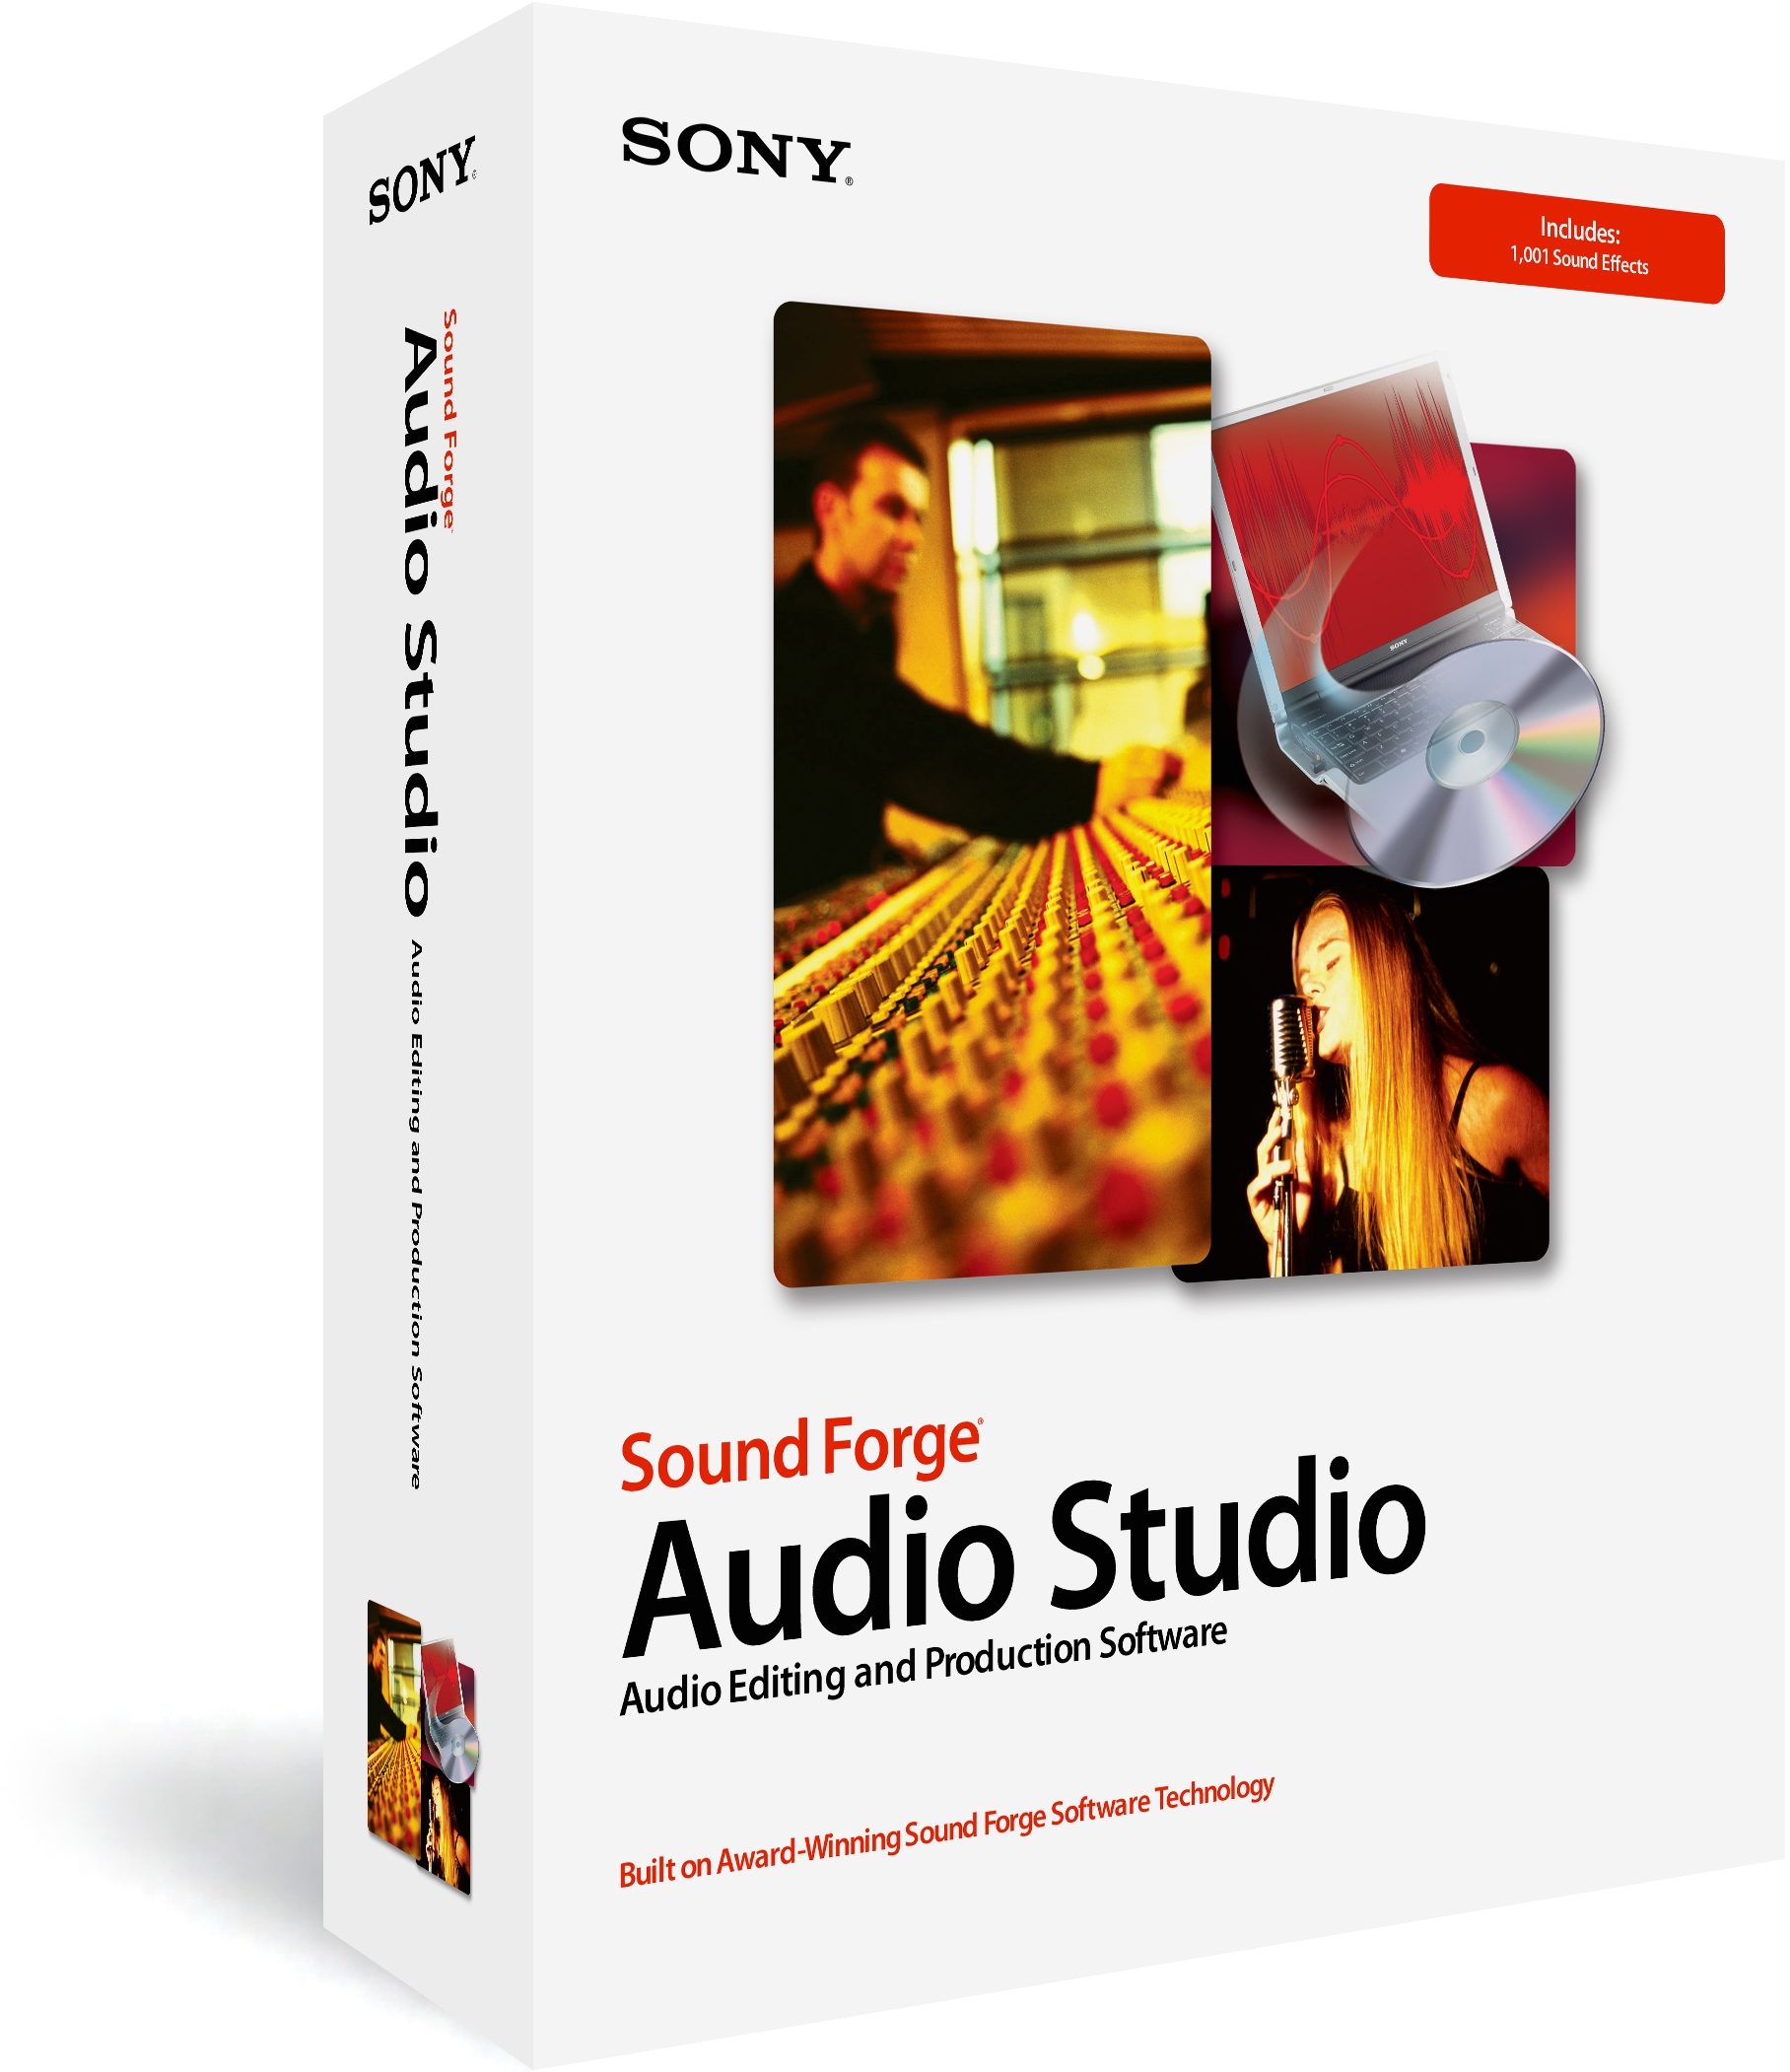 Sony sound forge 7.0 software